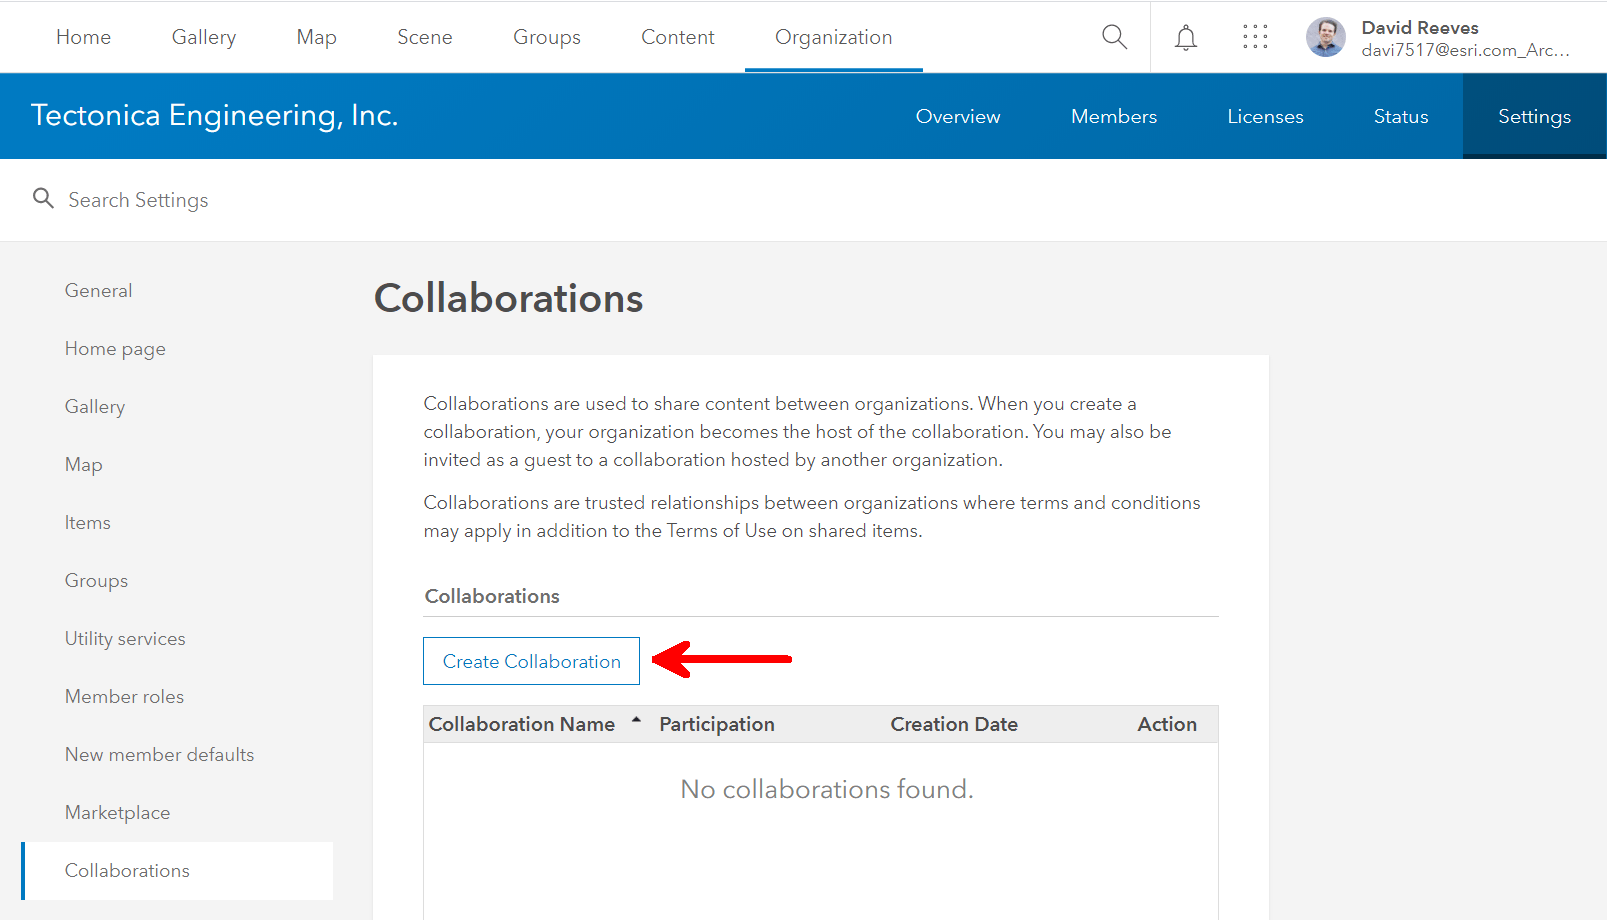 Only a user with administrative privileges can create a collaboration.